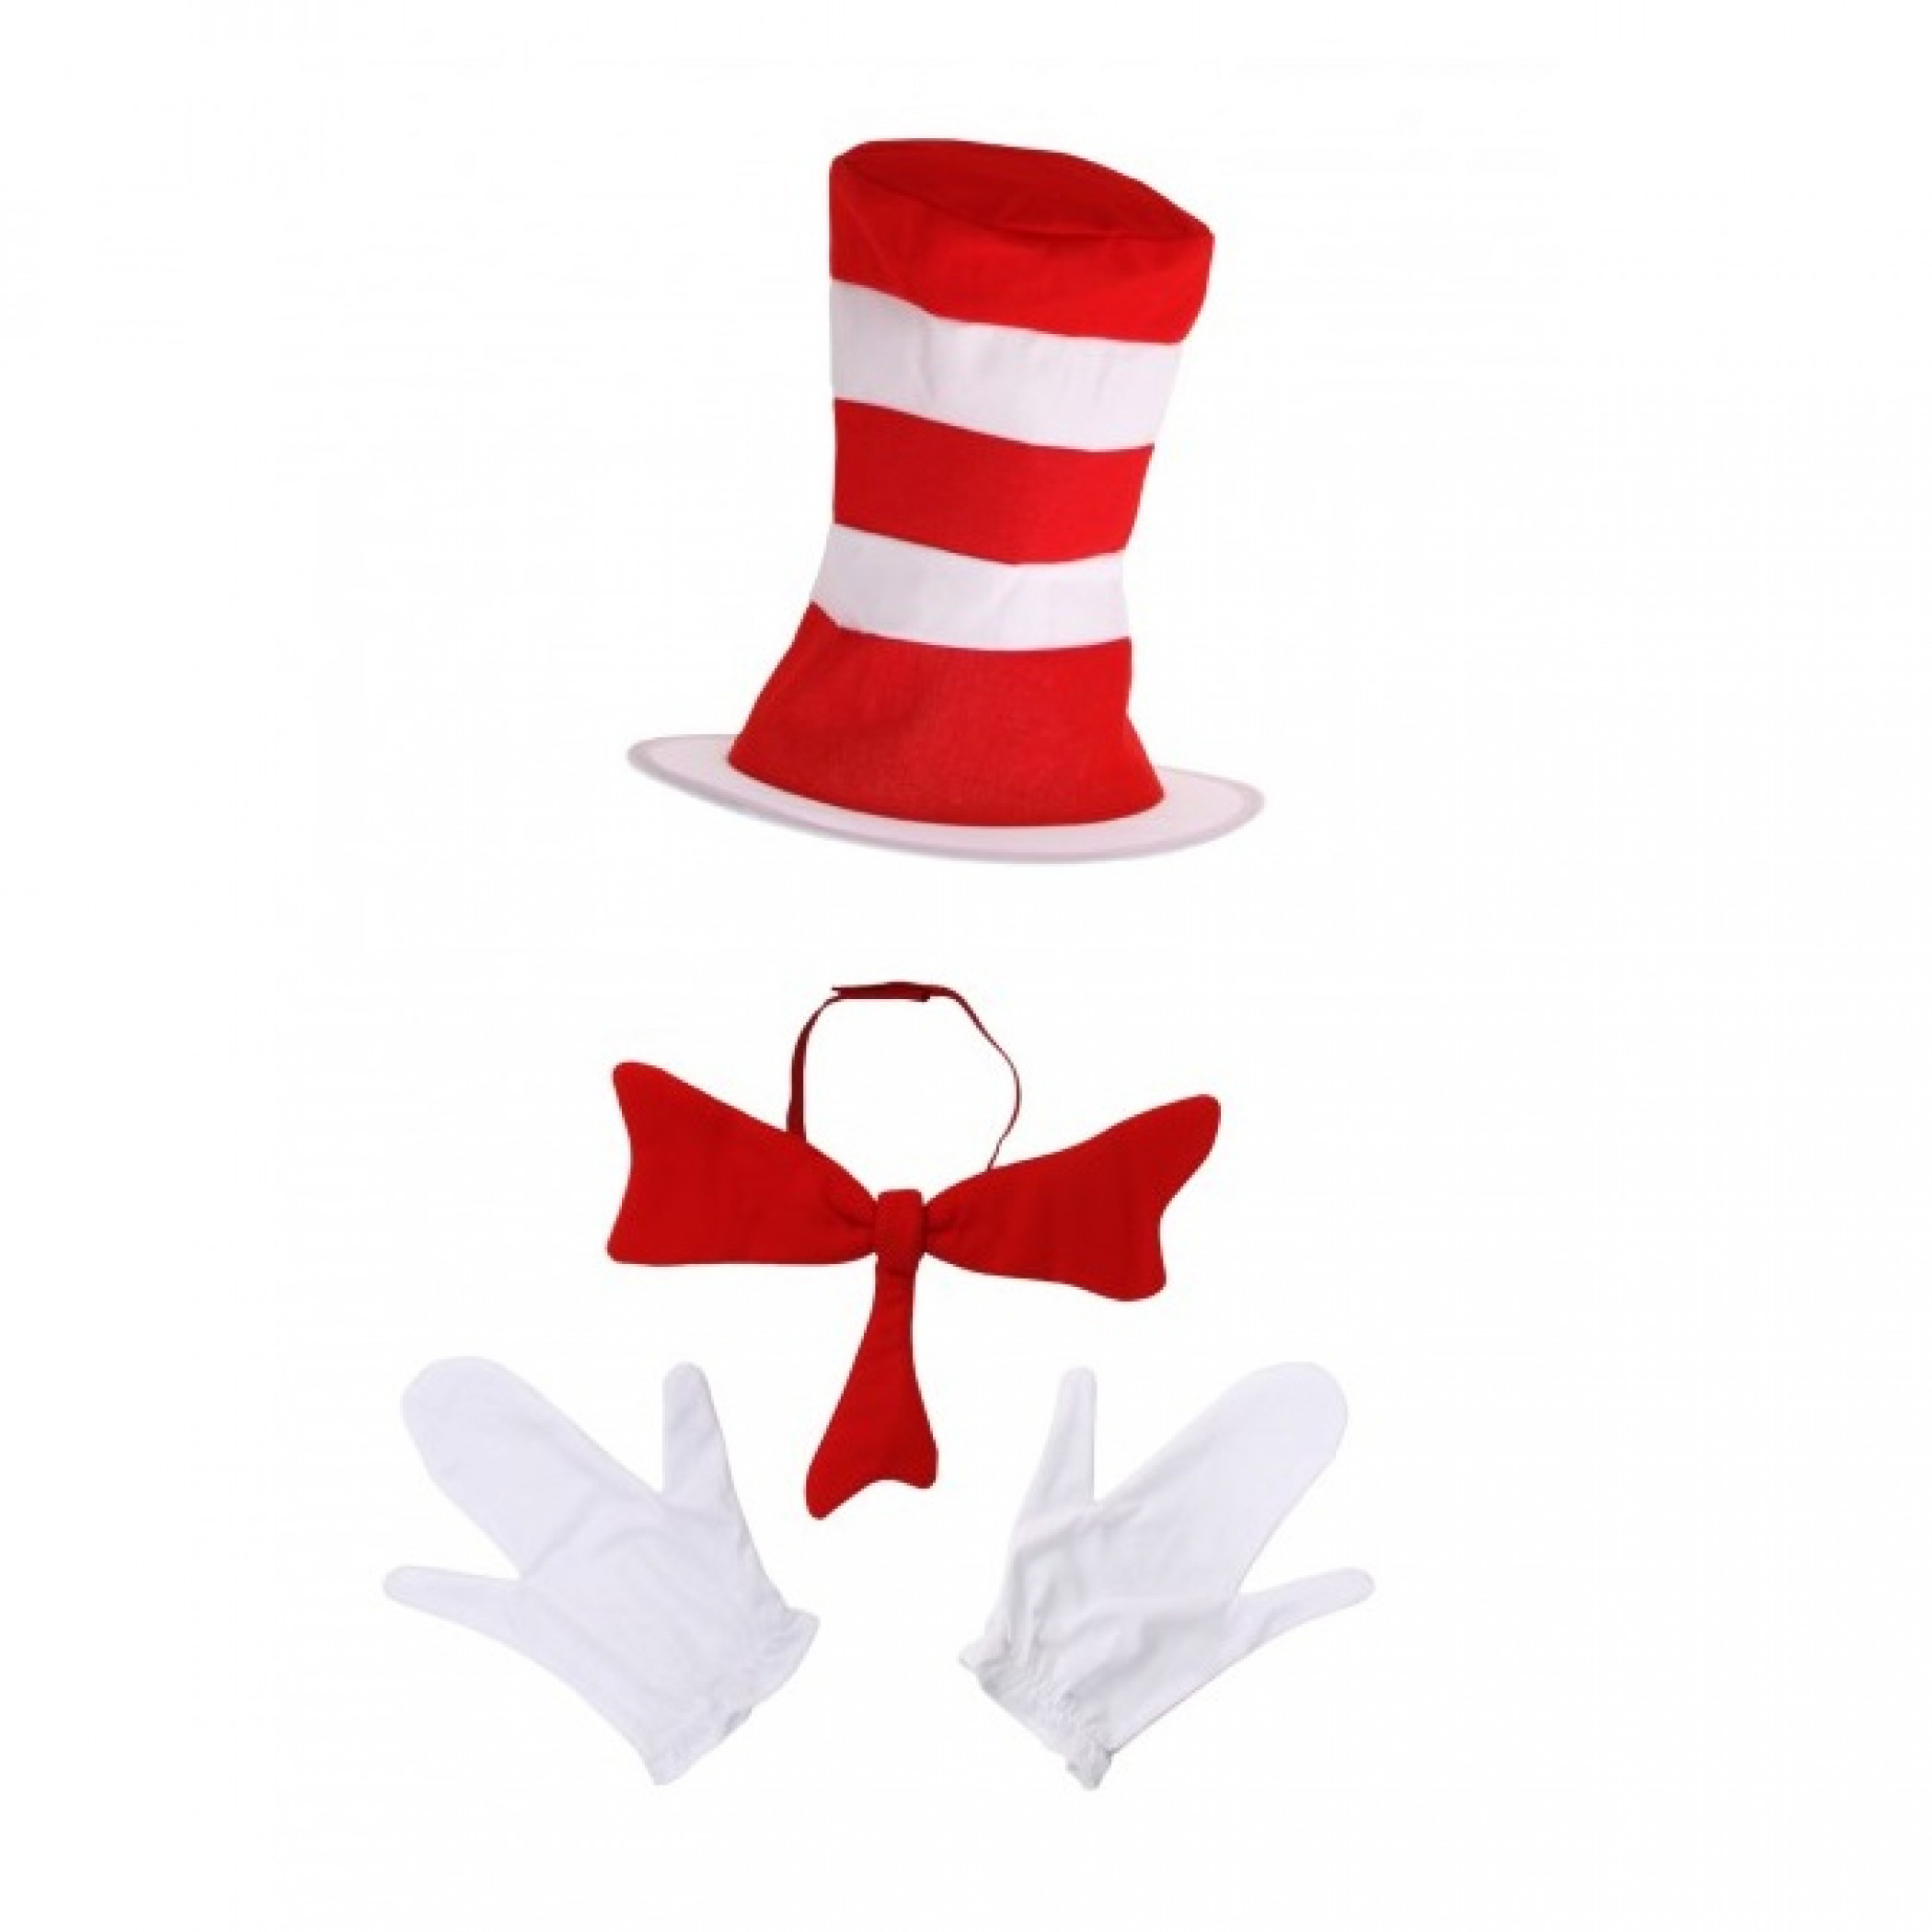 The Cat in the Hat Accessory Kit Adult